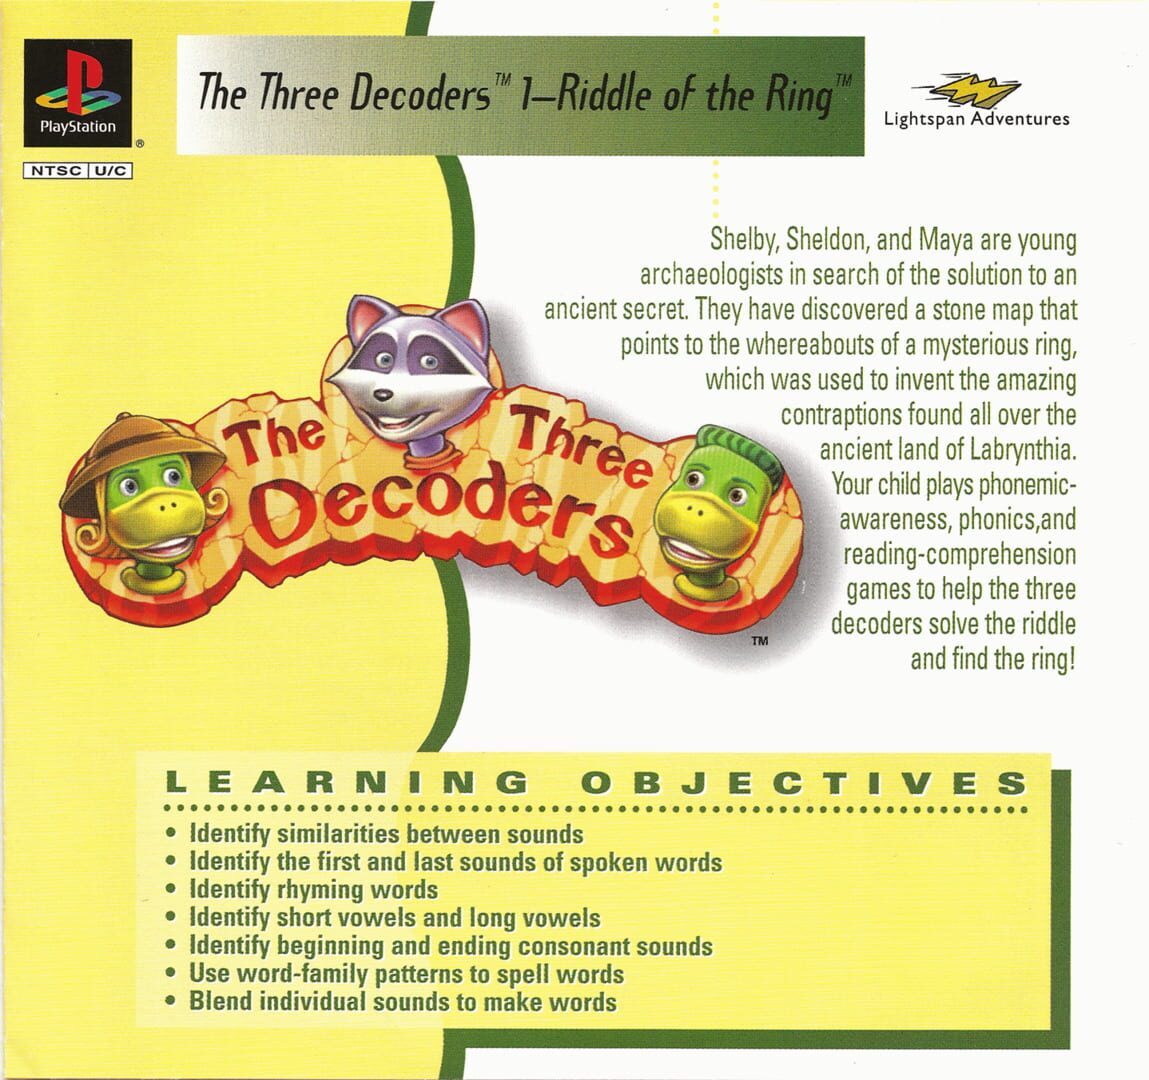 The Three Decoders 1 - Riddle of the Ring